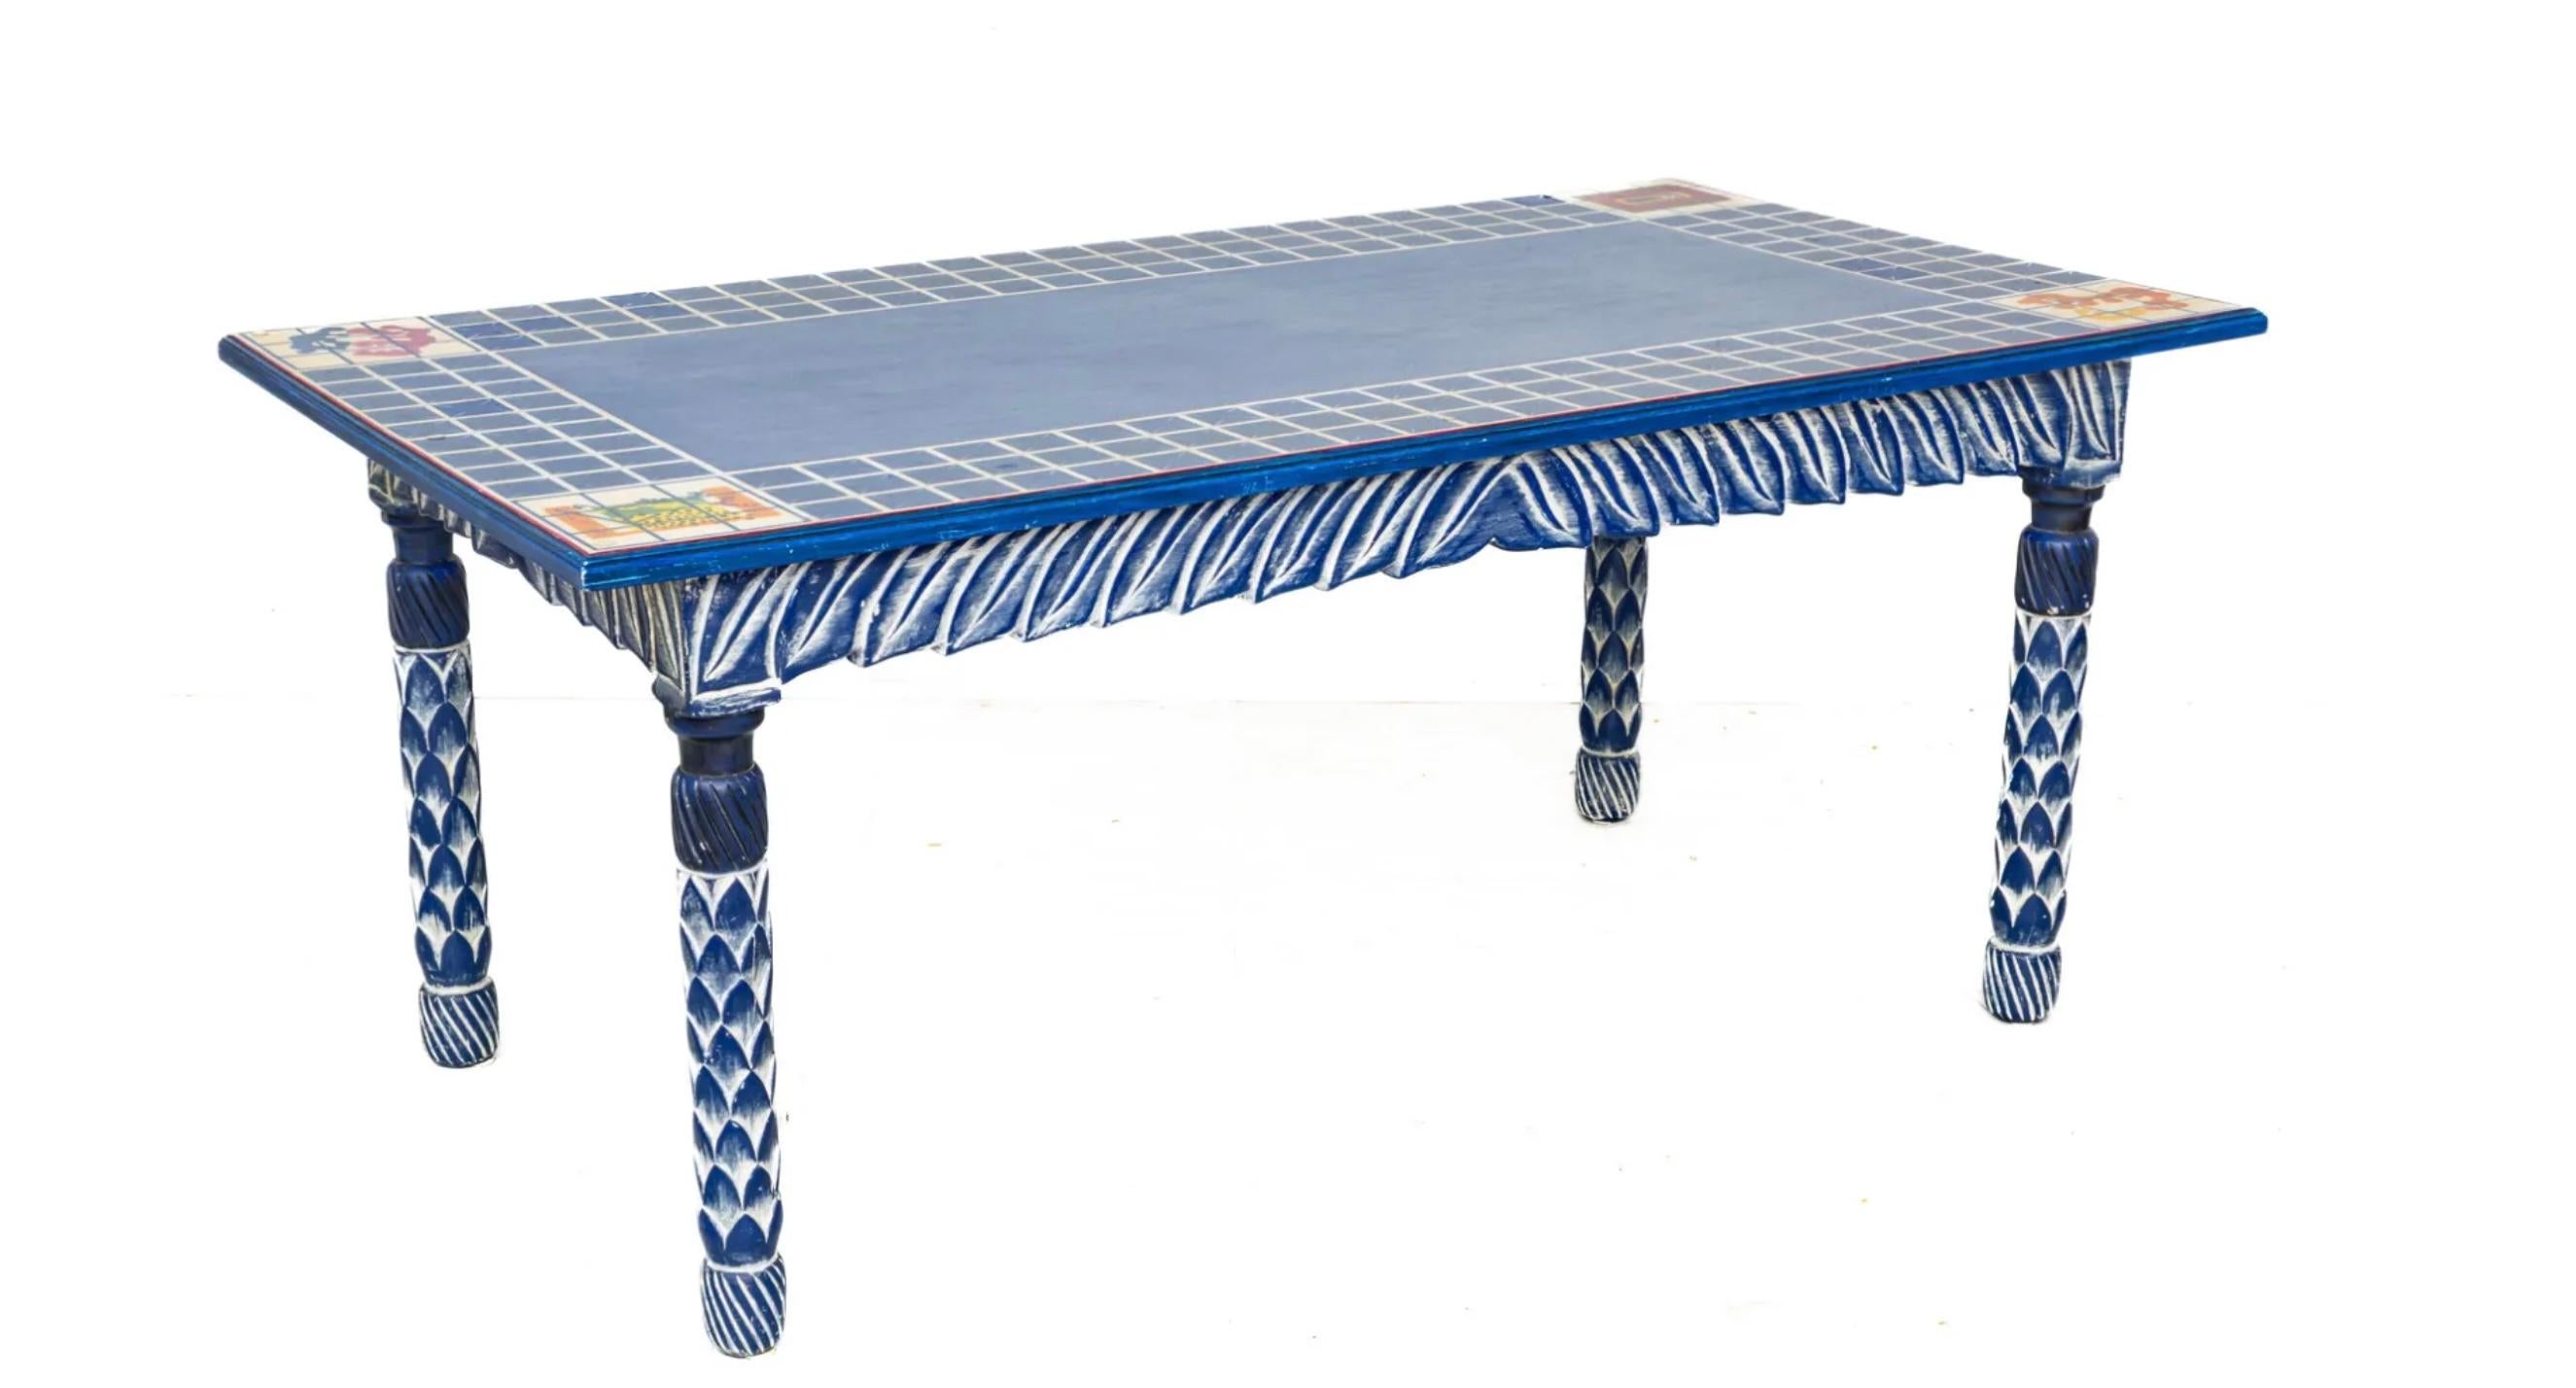 Mid Century Azul Hand painted wood Dining Table Made In Mexico with Painted Tiles leaves, and Pineapple motif legs. Very Unique hand painted table very unique design. Located in Brooklyn NYC

Dimensions L 72''  W 38'' H 30'' (Solid table no Leaves)